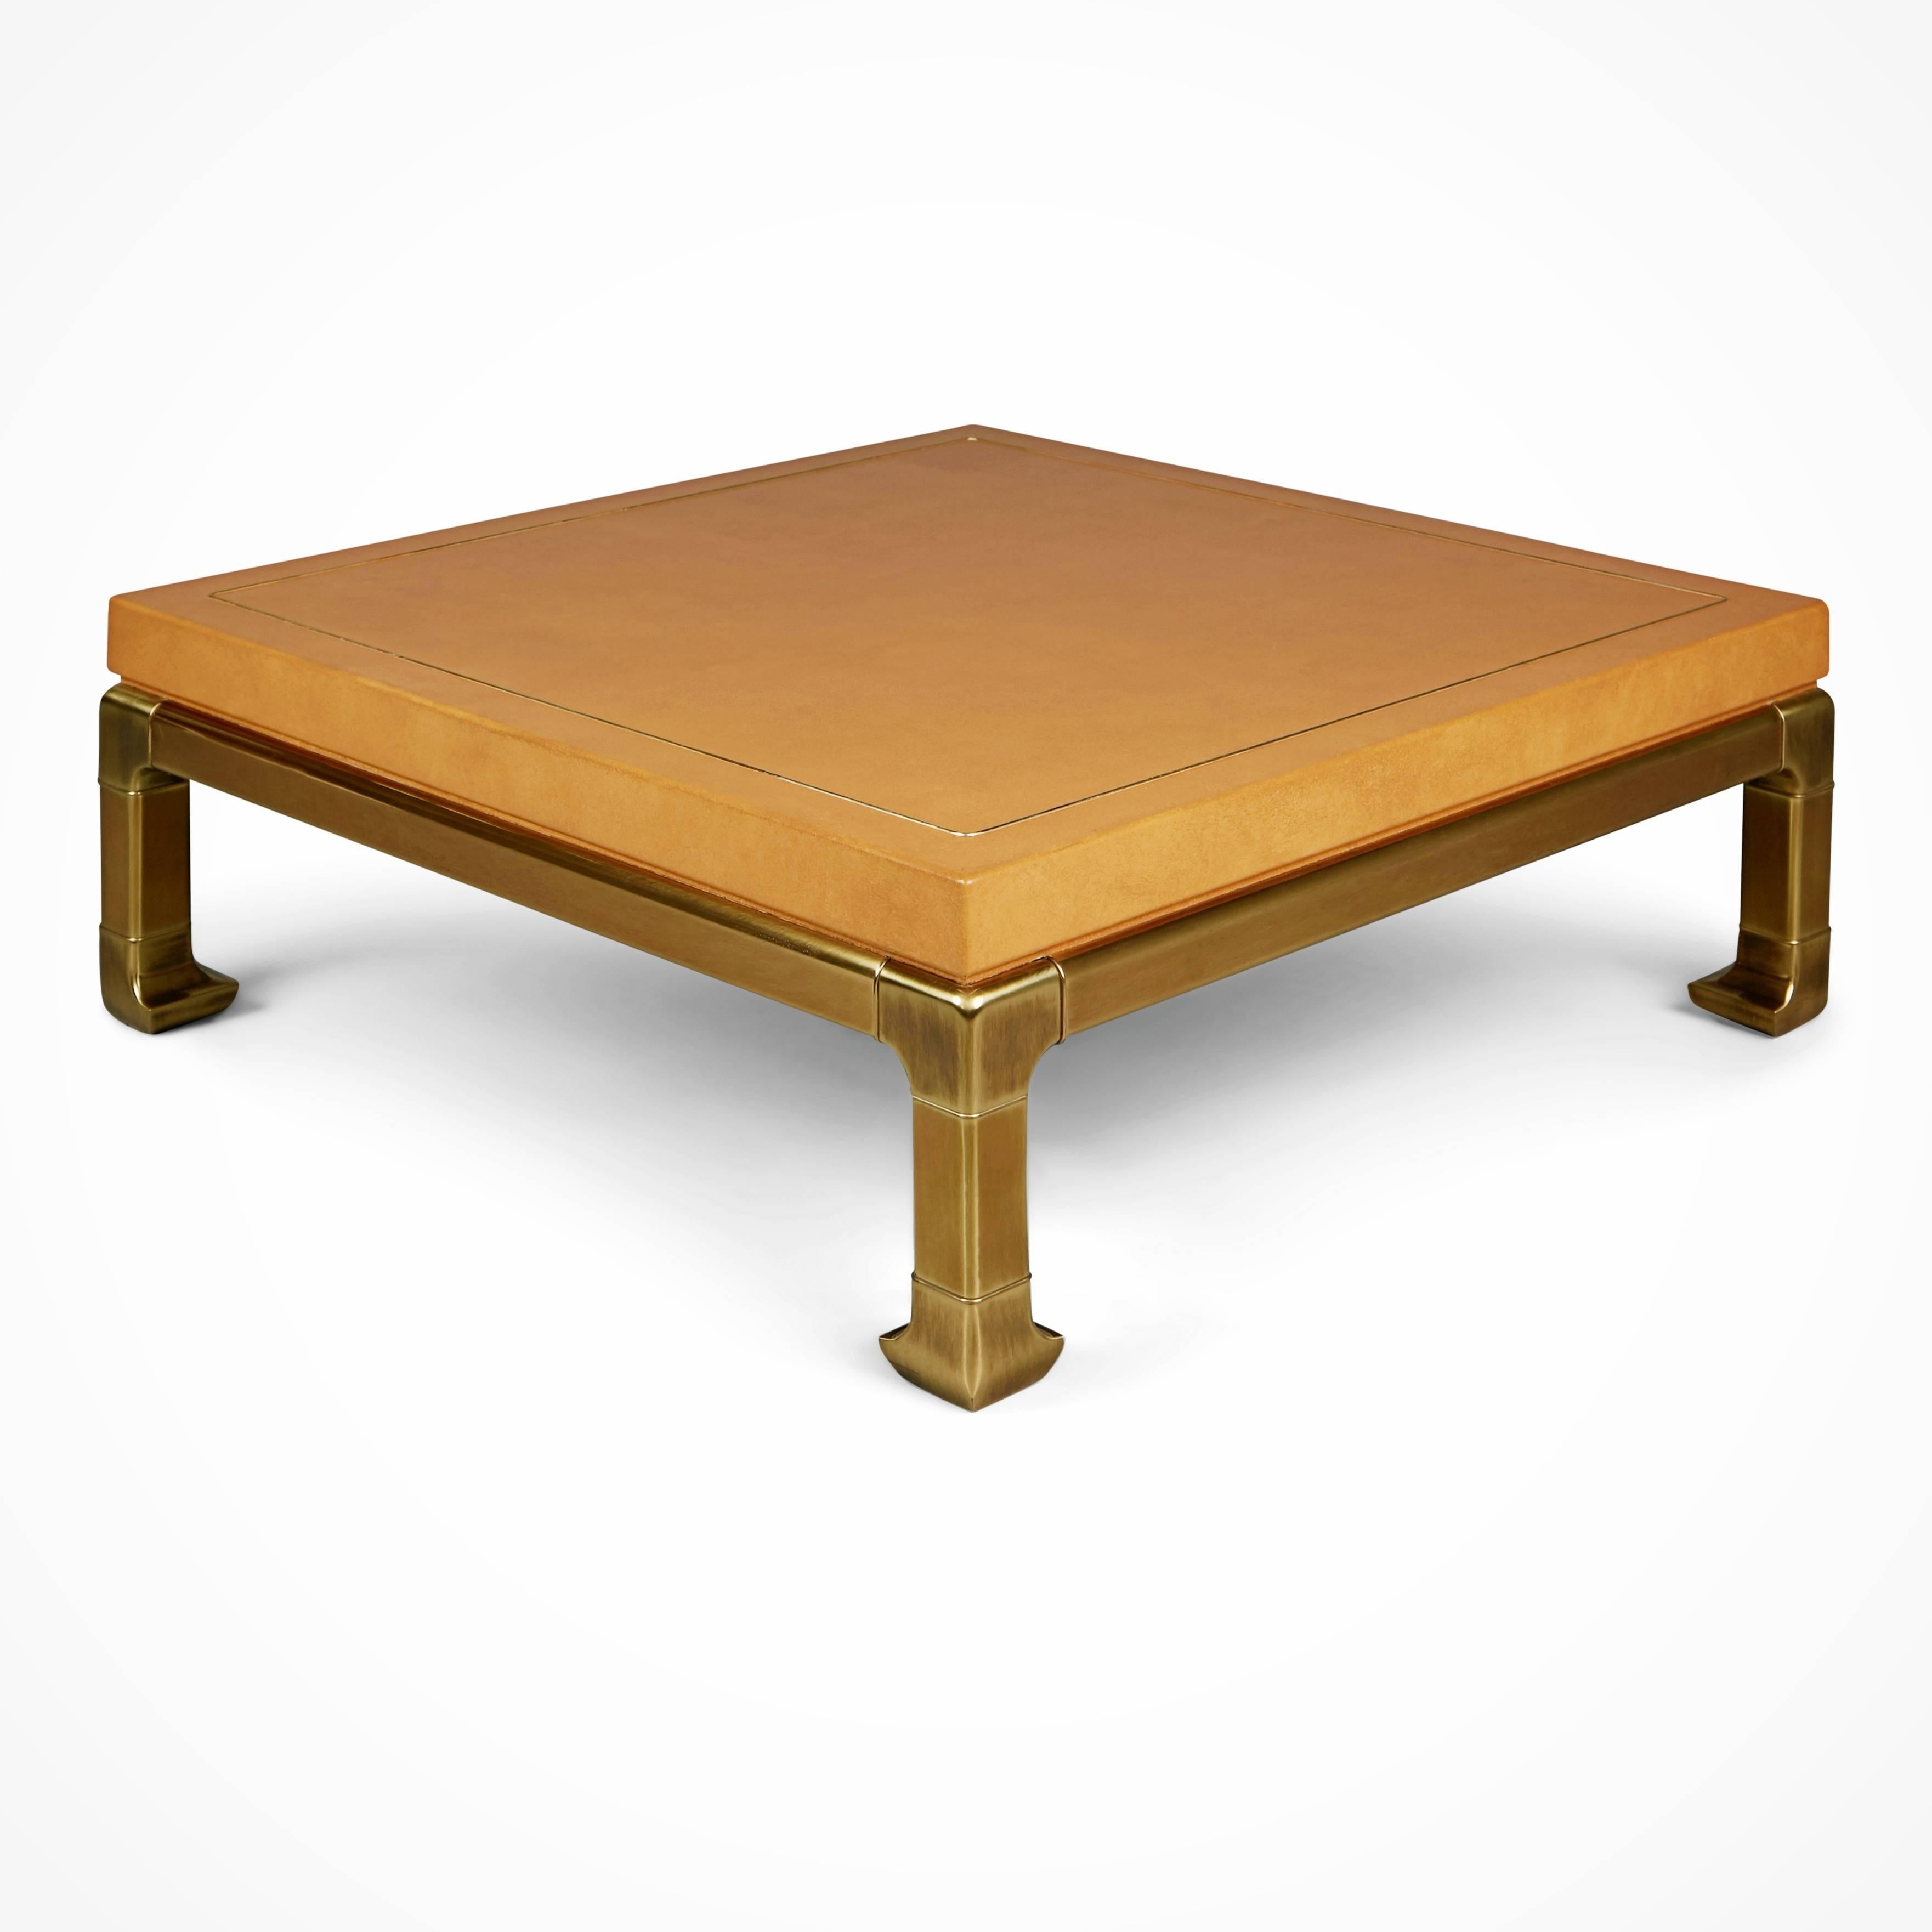 American Mastercraft Faux Ostrich Skin and Brass Coffee and Side Table Set, circa 1970